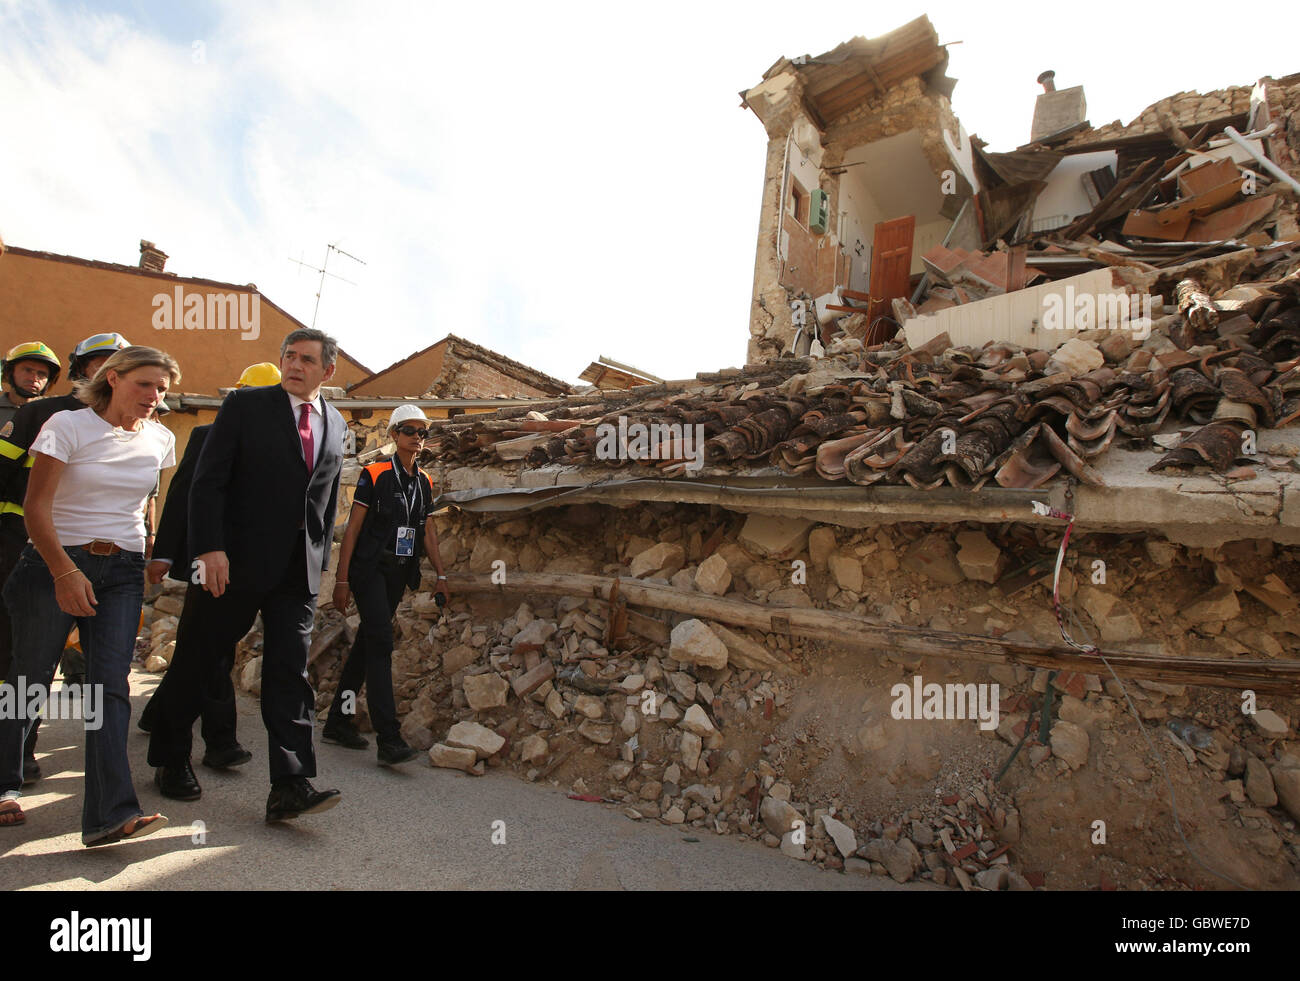 Prime Minister Gordon Brown visits the ruined village of Onna near L'Aquila, Italy which was at the epicentre of the earthquake which struck the region on April 6, 2009. Stock Photo